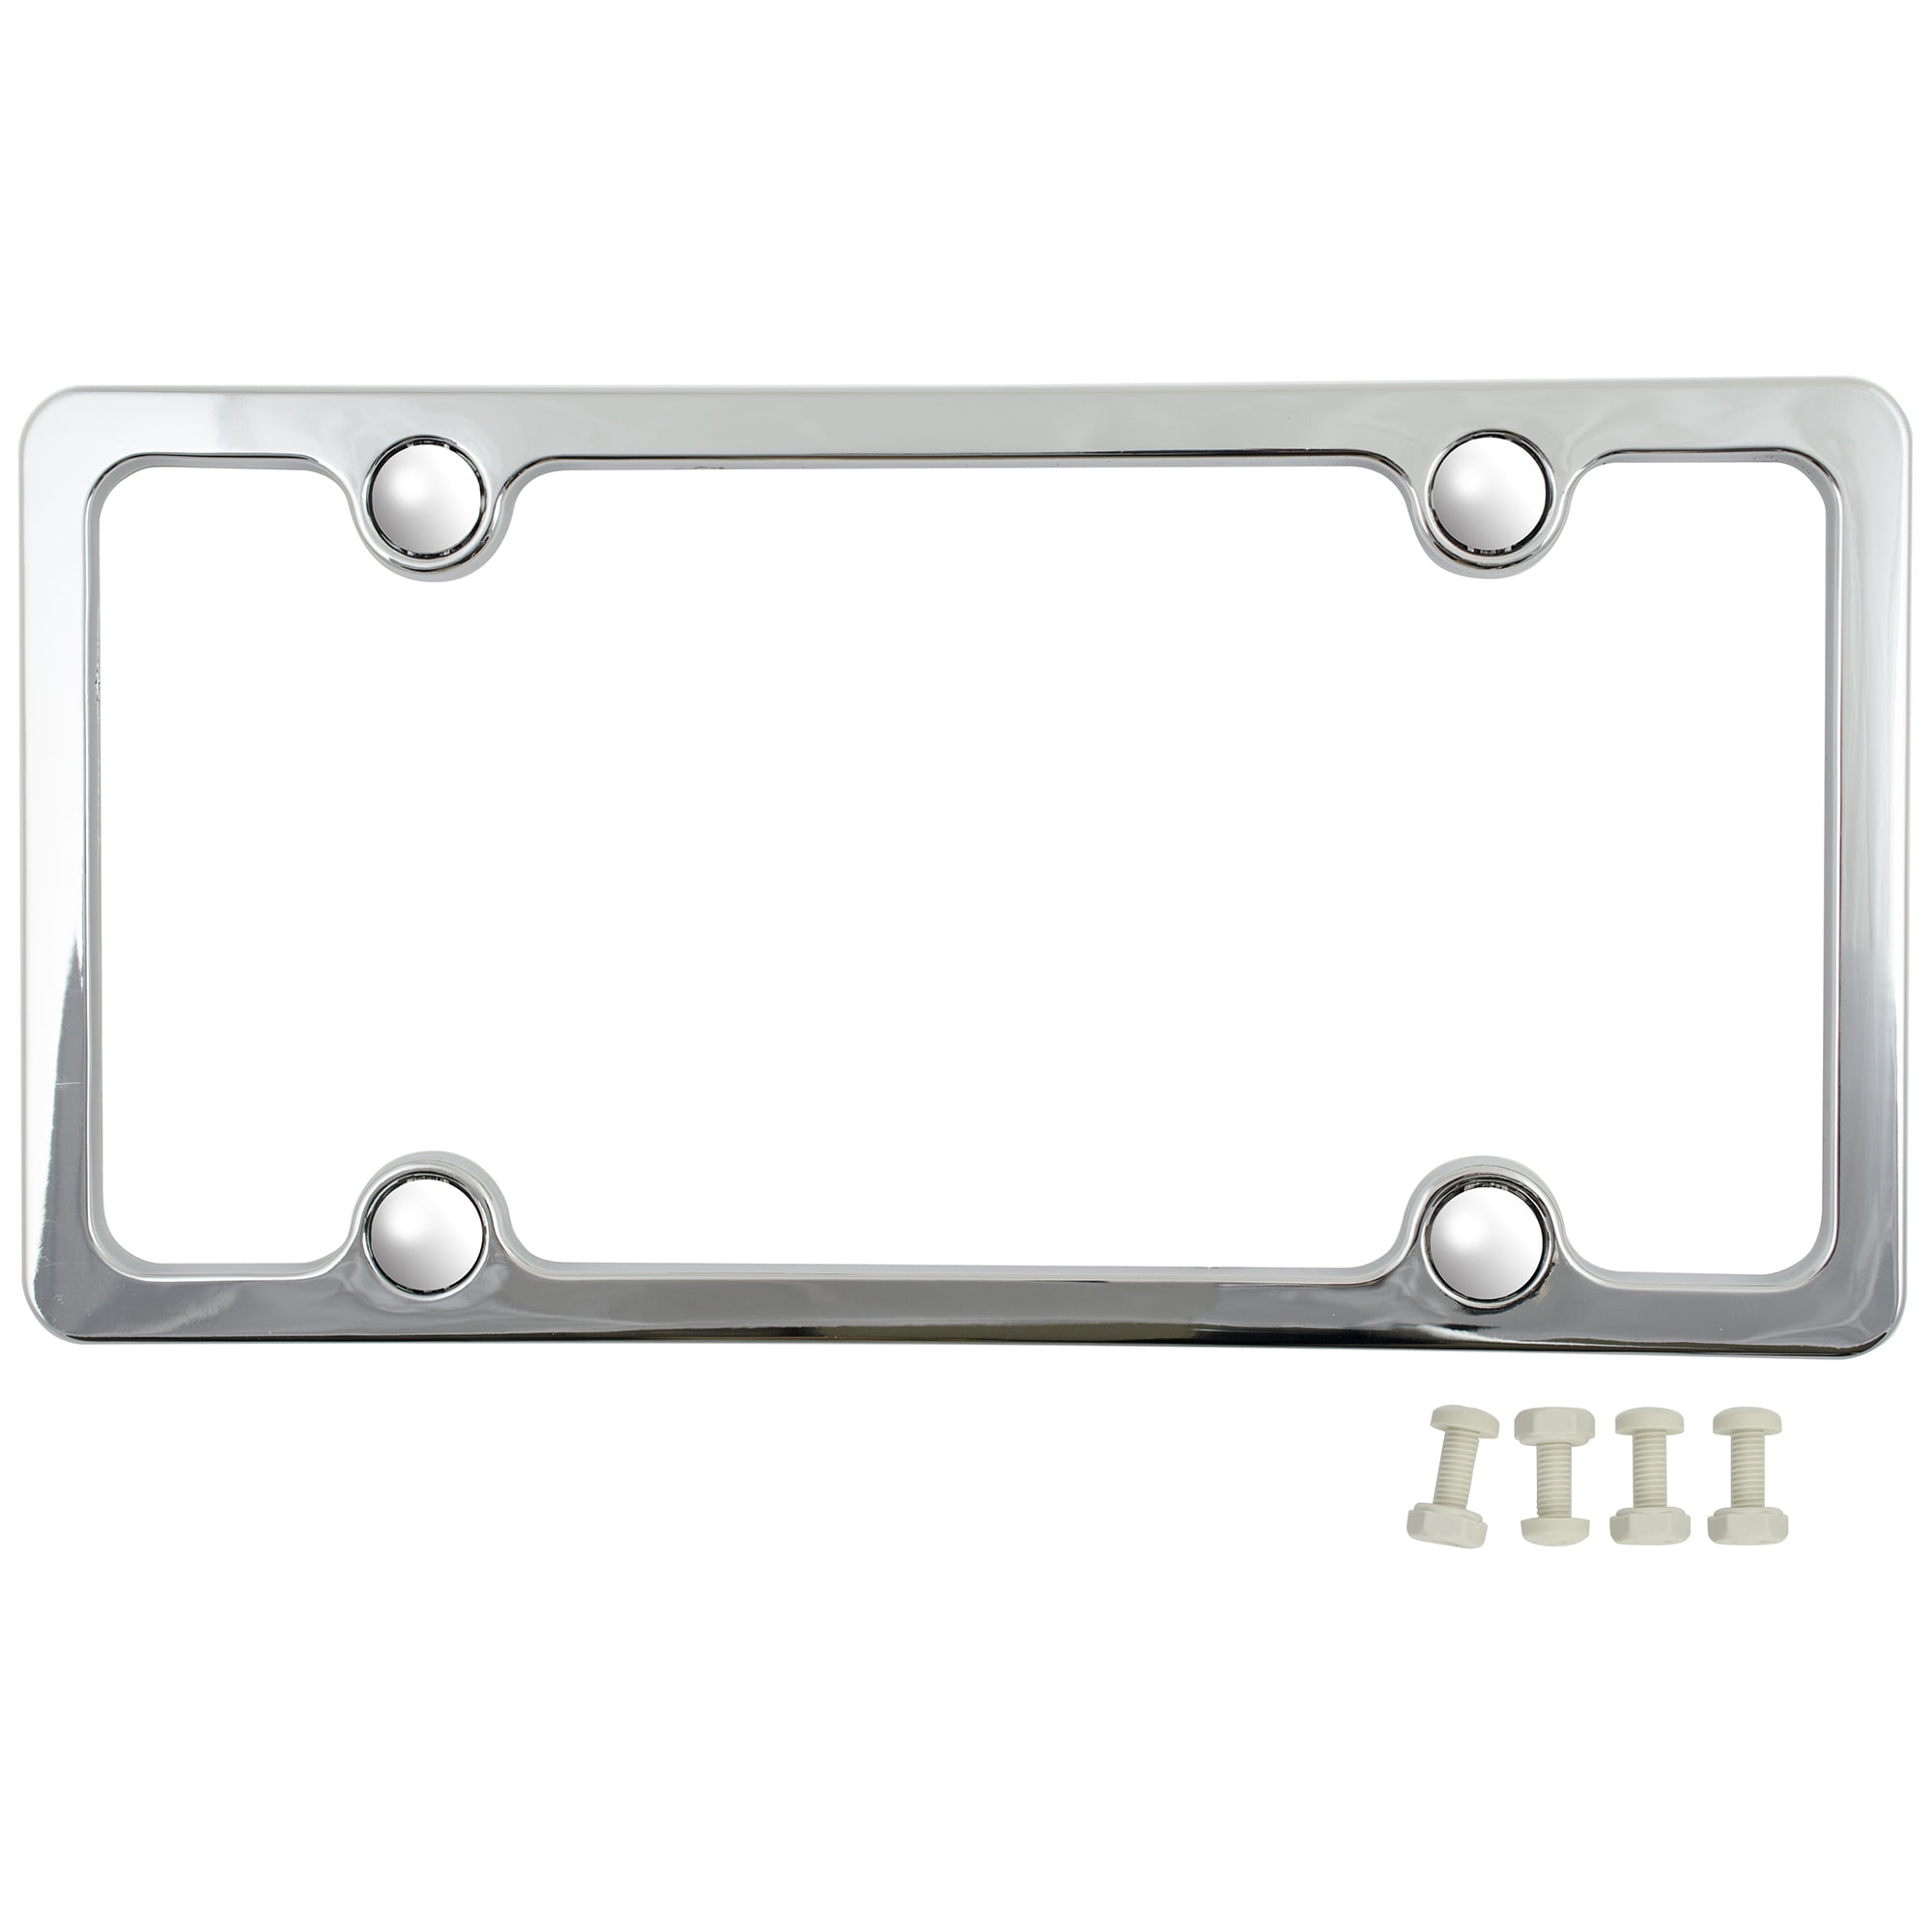 Motorcycle Scooter Blank Plastic License Plate Frame Set Tag Holder New Plain